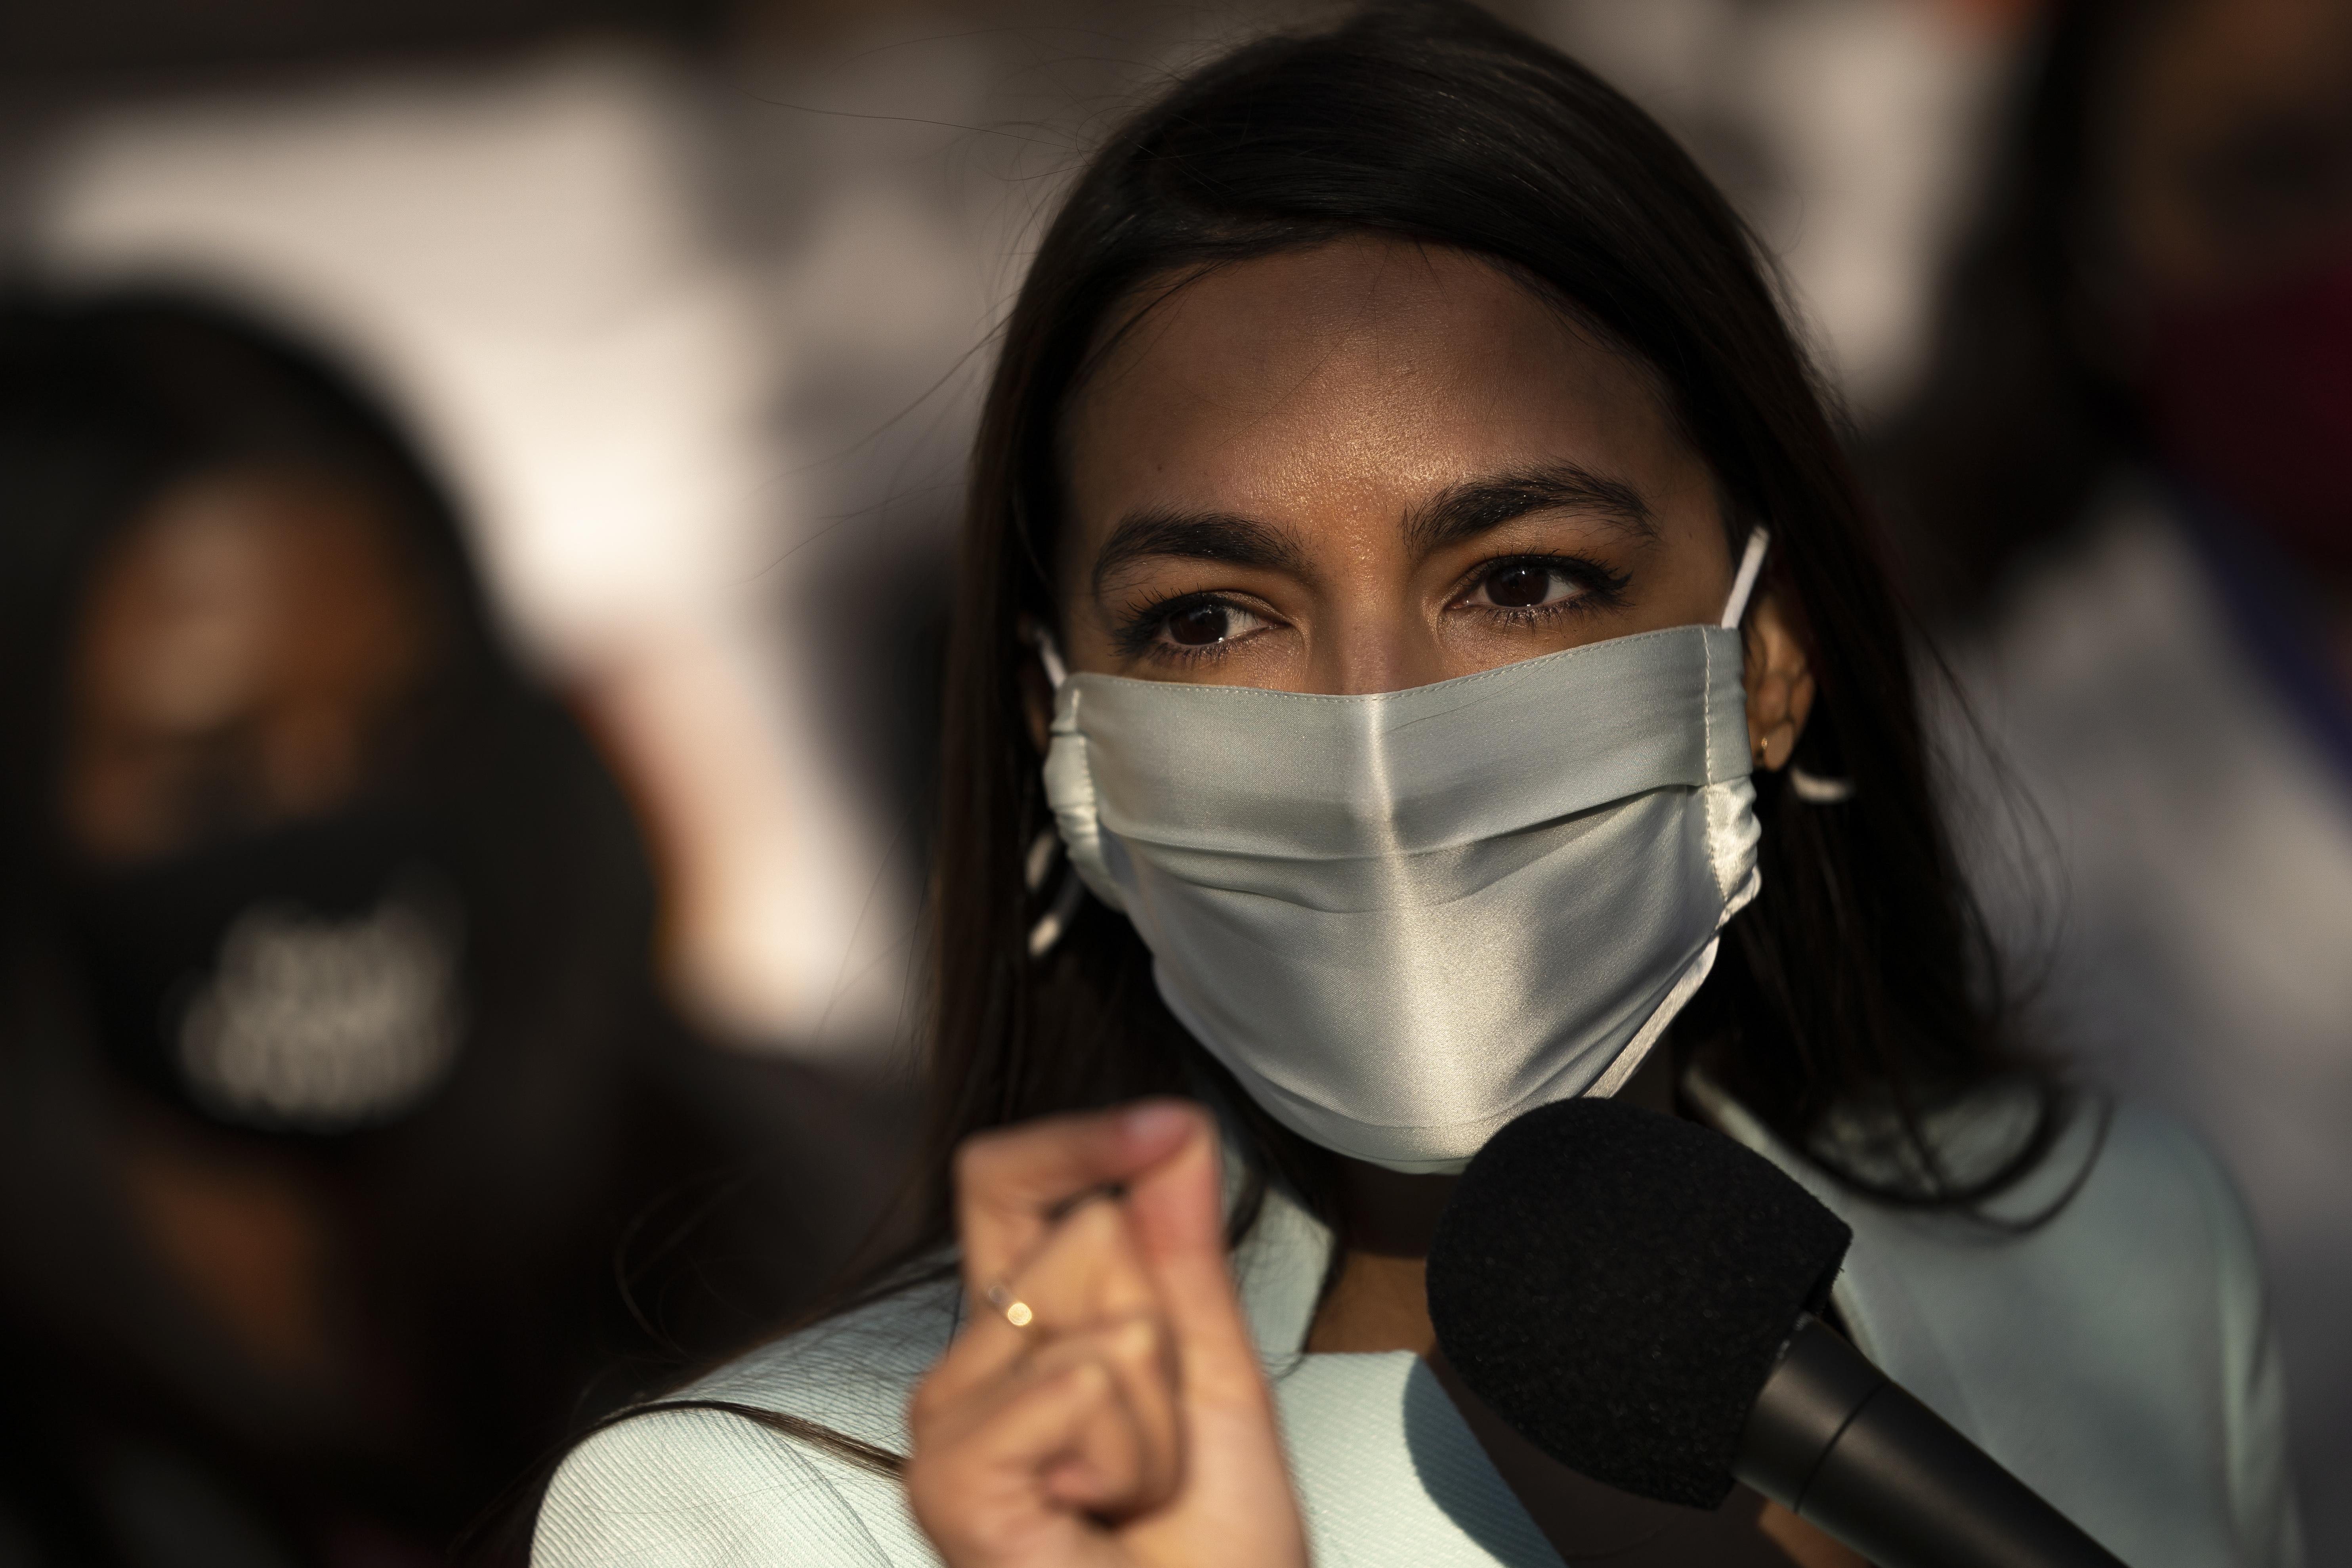 Alexandria Ocasio-Cortez speaking with a mask on at a mic outside